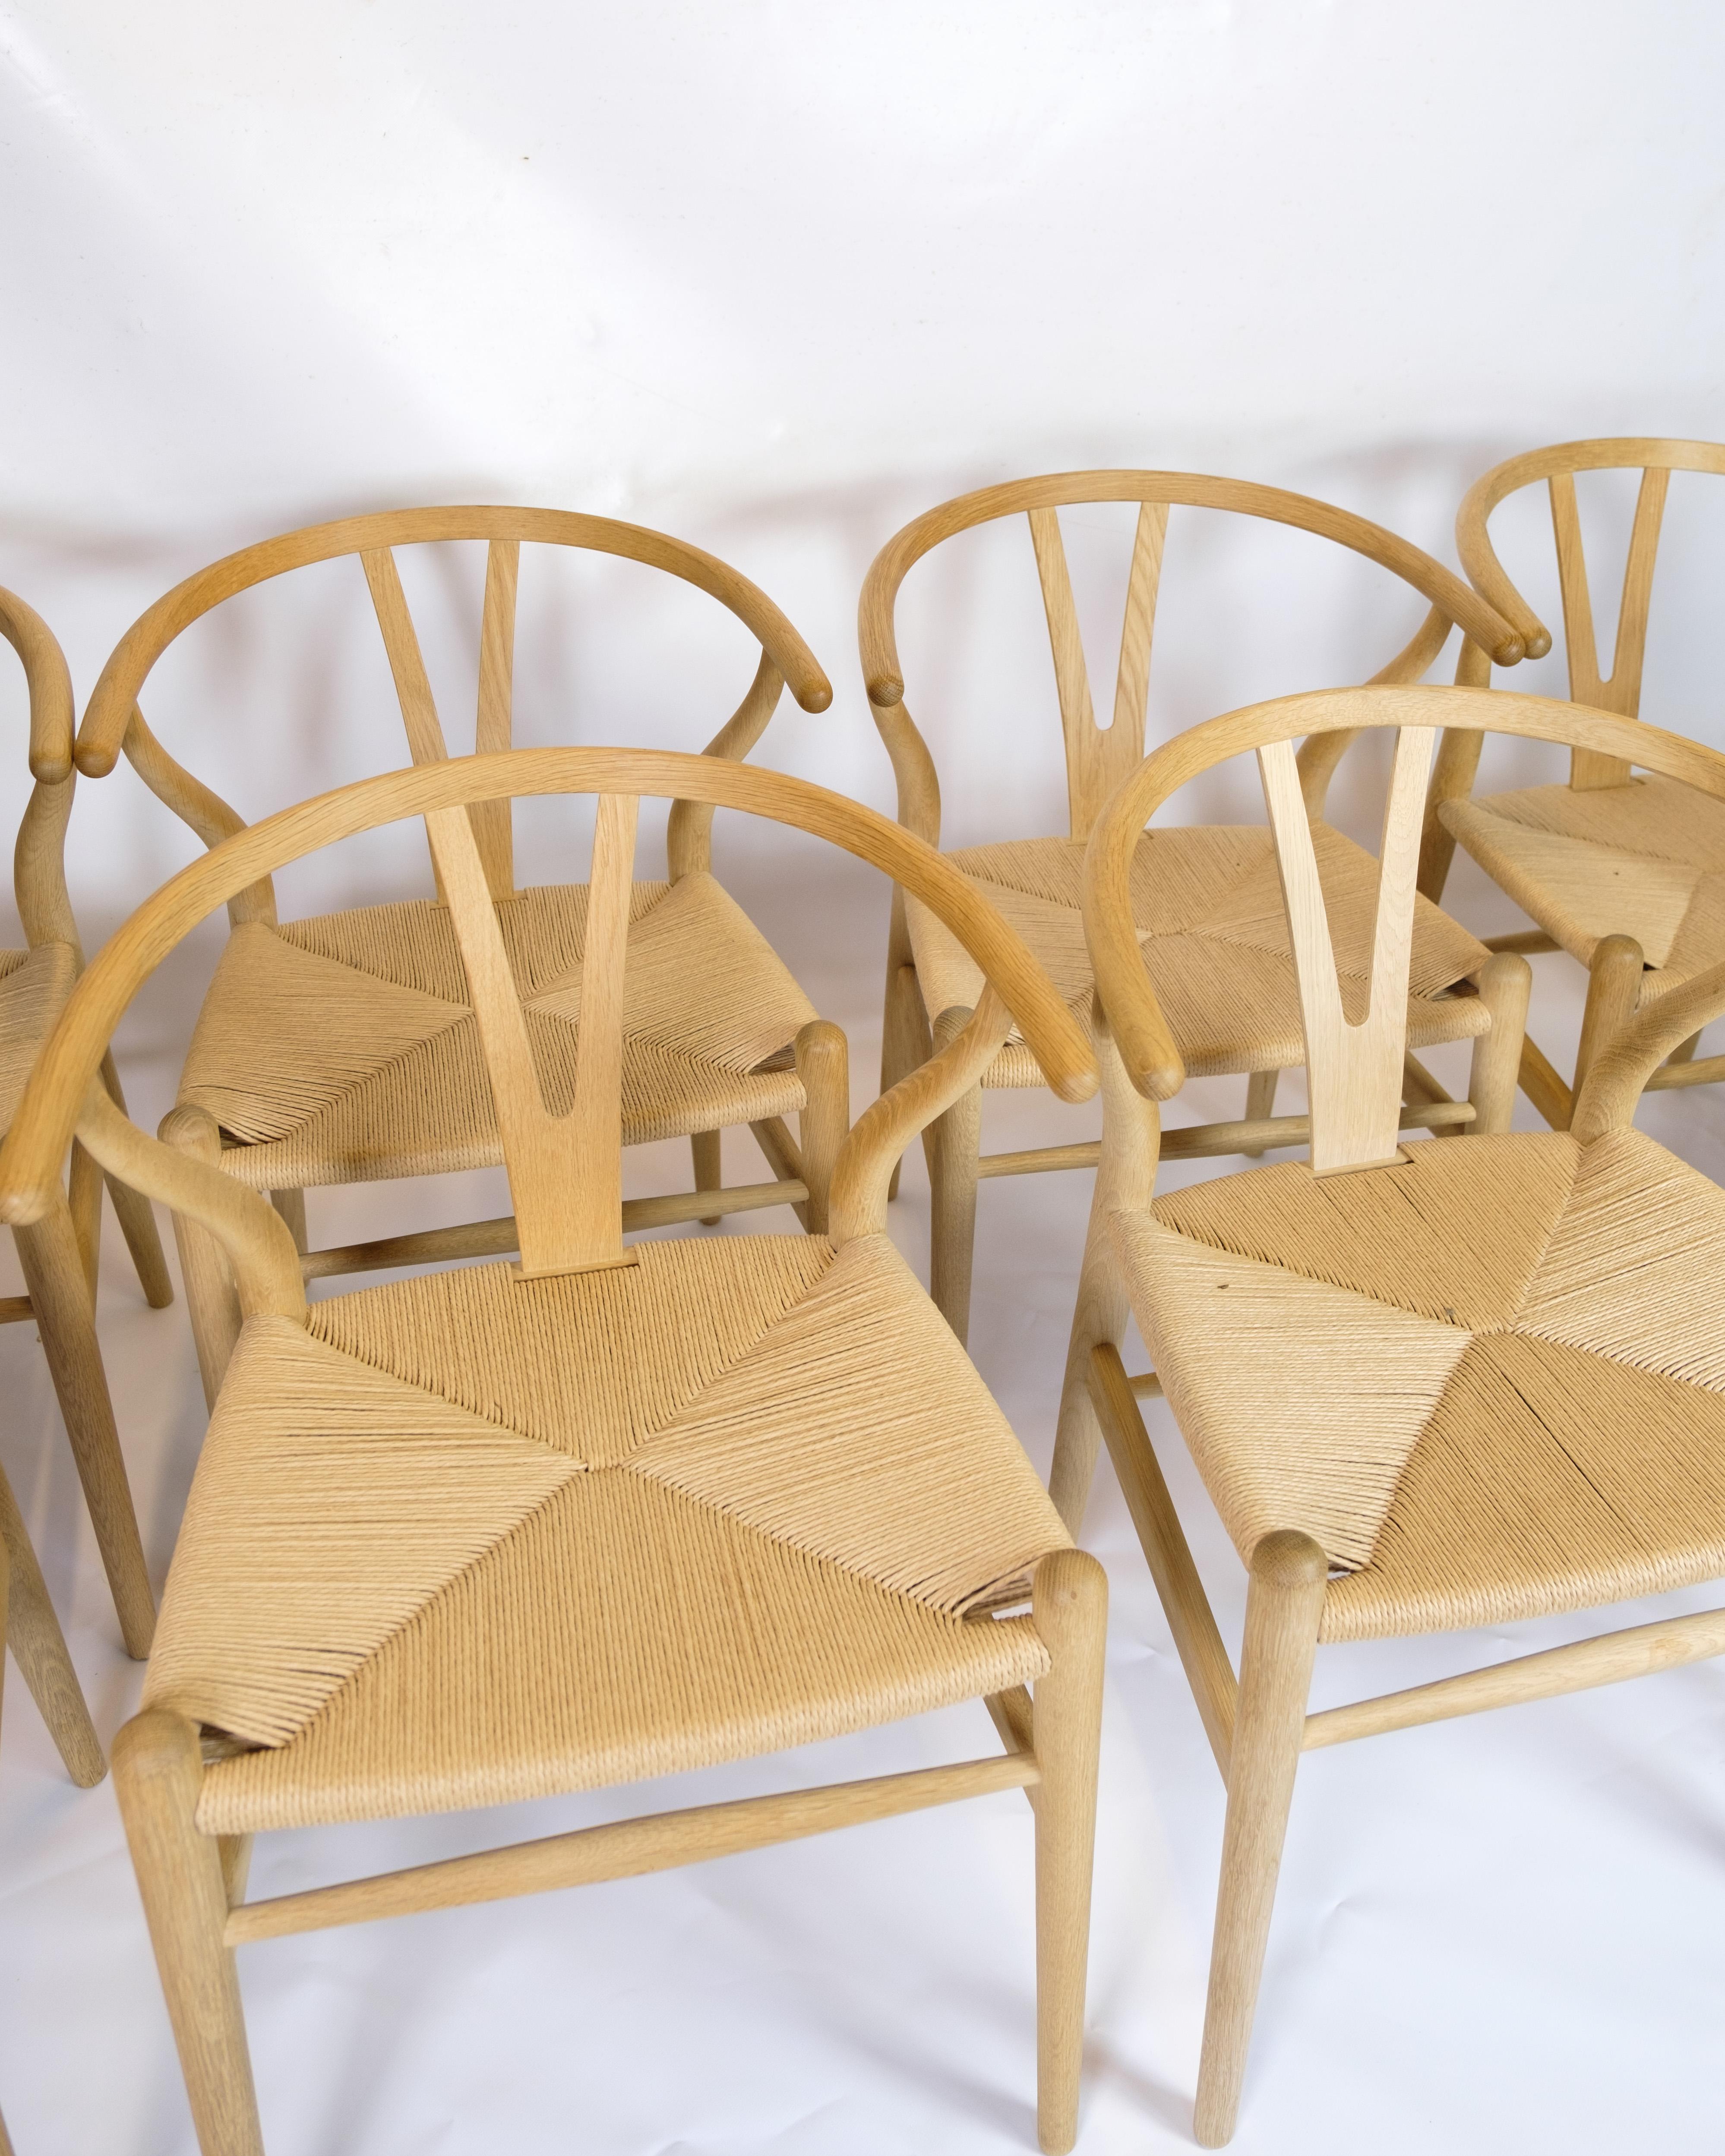 The set of four Y-chairs, model CH24, is an iconic design created by the famous Danish architect and furniture designer Hans J. Wegner in 1950. The chairs are crafted in oak, which adds a natural warmth and elegance to their